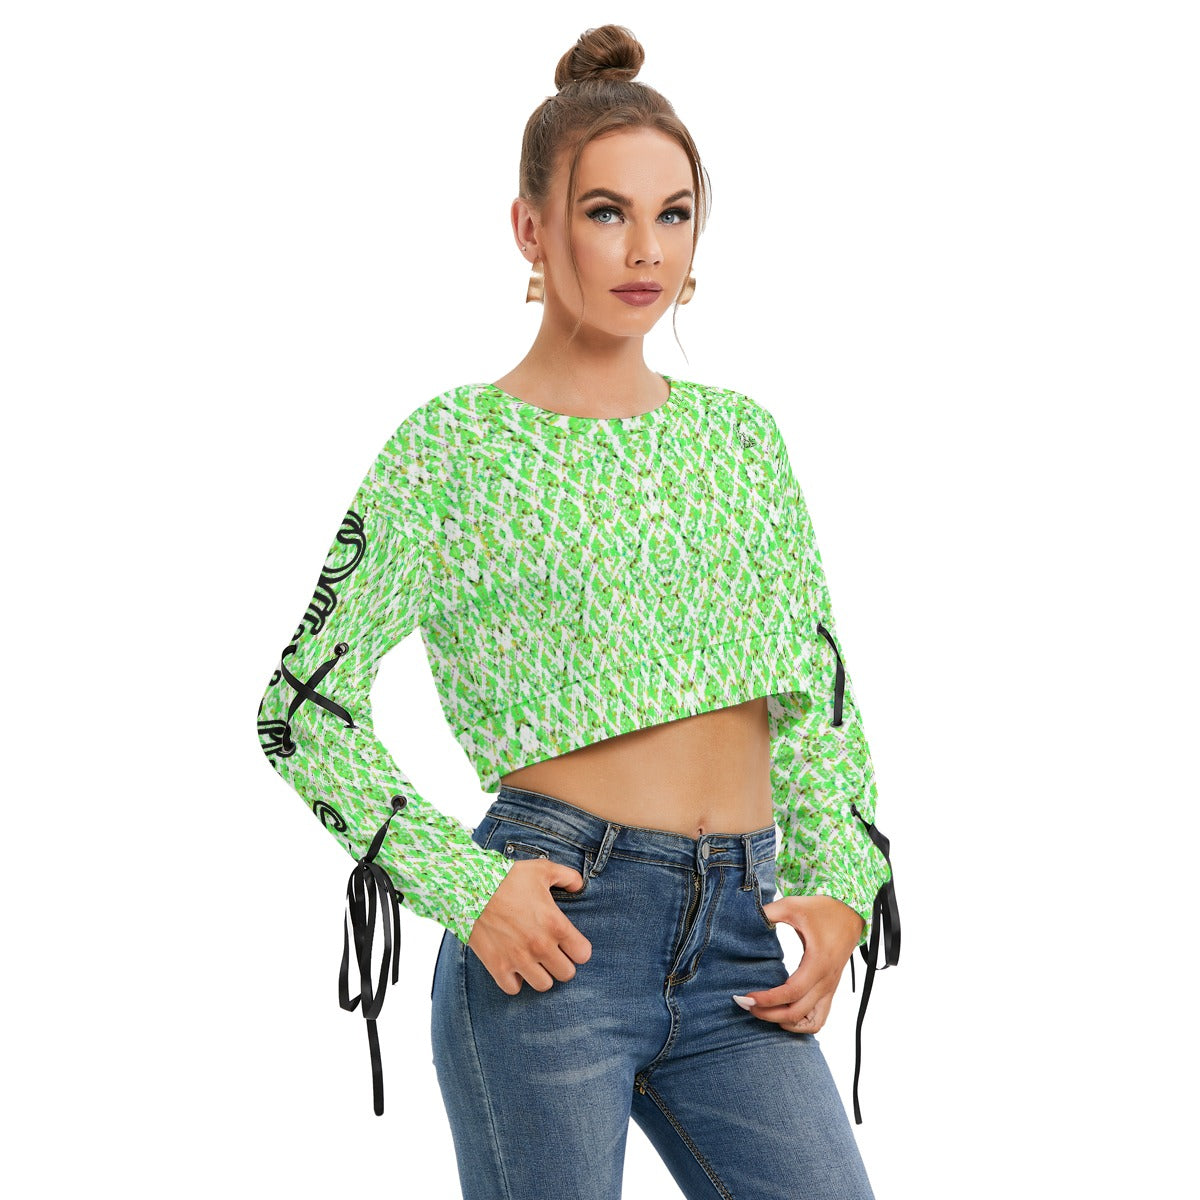 Officially Sexy Neon Green Stitched FHC Women's Long Sleeve Cropped Sweatshirt With Lace up Sleeves Right